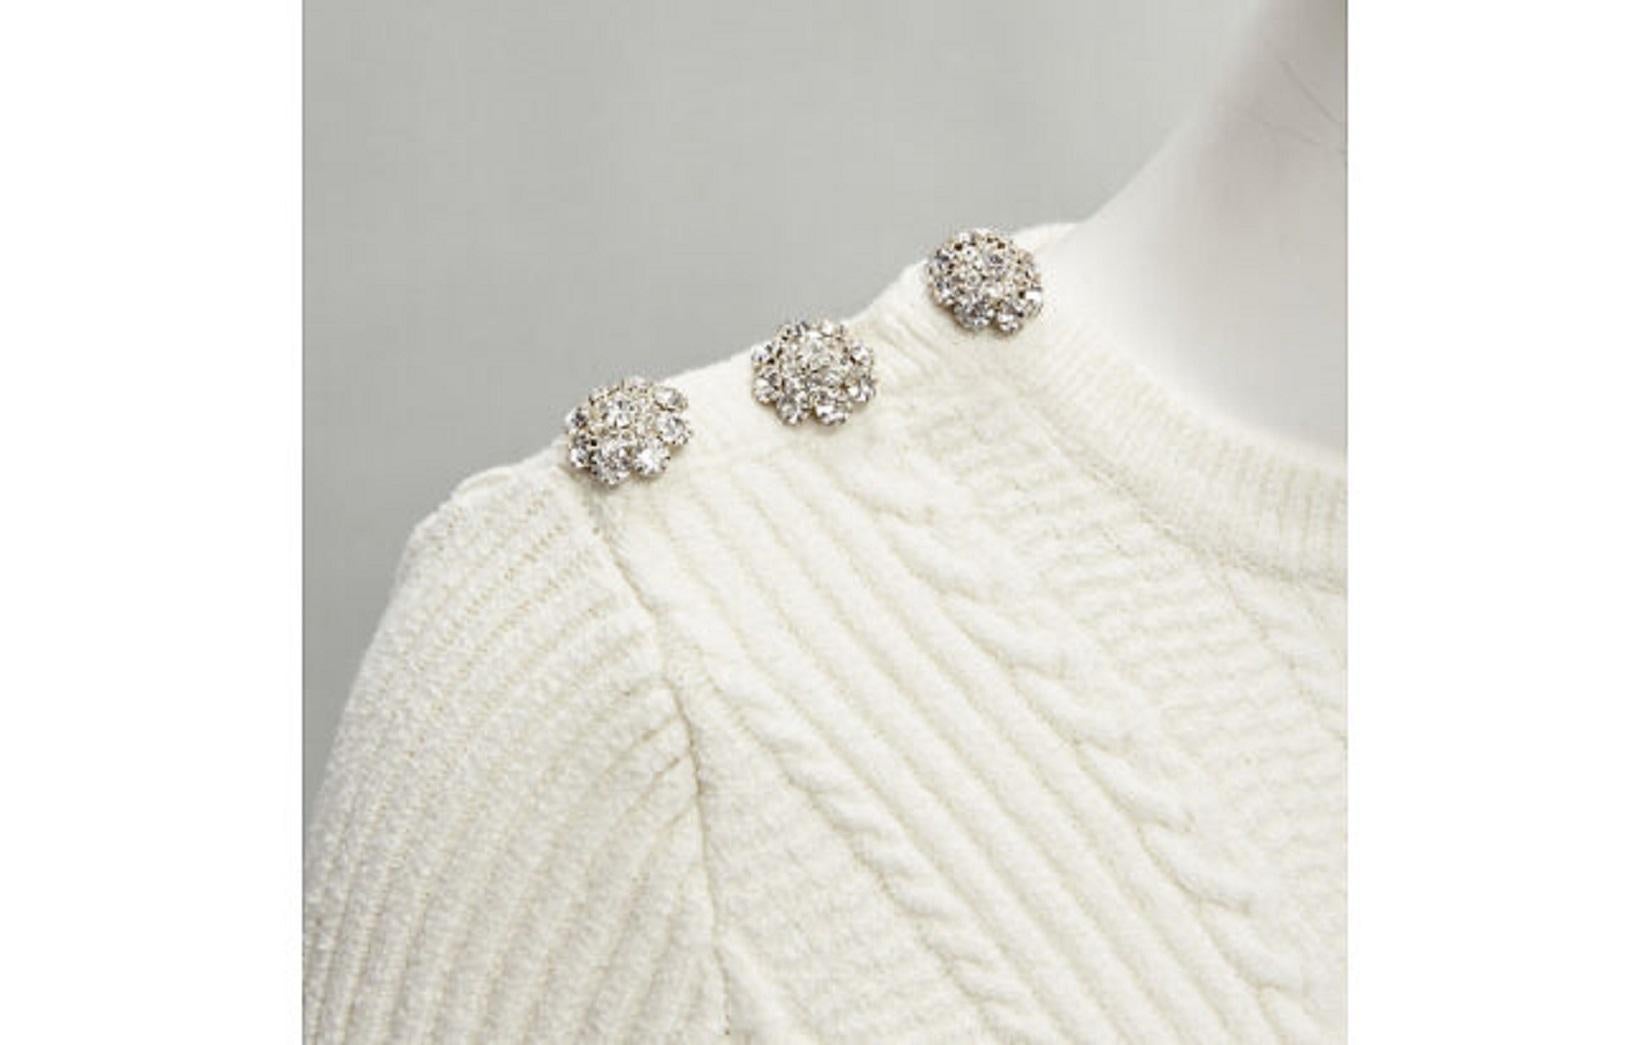 GANNI ivory crystal button textured knit cotton blend sweater top XS
Reference: AAWC/A00227
Brand: Ganni
Material: Cotton, Blend
Color: Ivory
Pattern: Knitted
Extra Details: Crystal buttons on right shoulder.
Made in: China

CONDITION:
Condition: